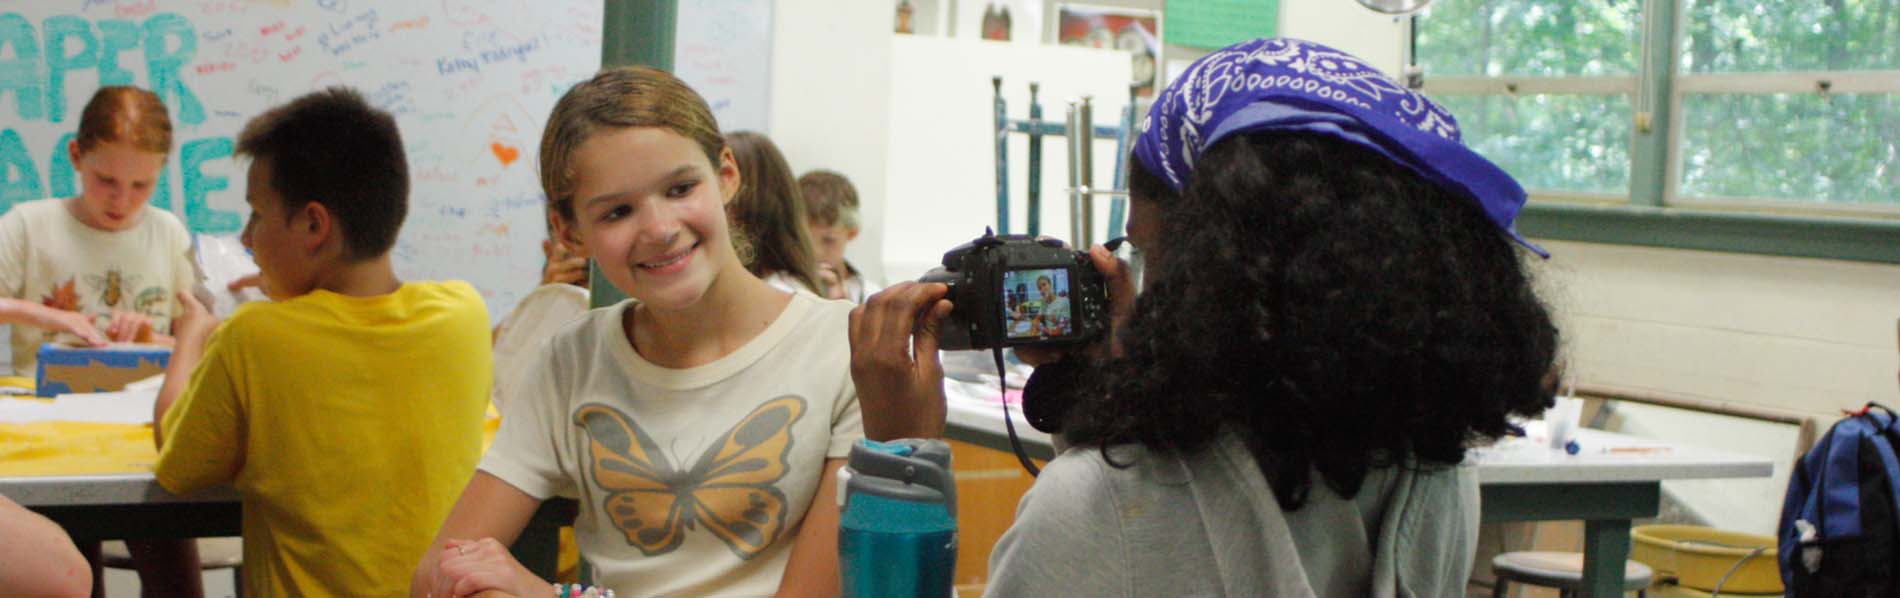 young girl taking photo of another student during class